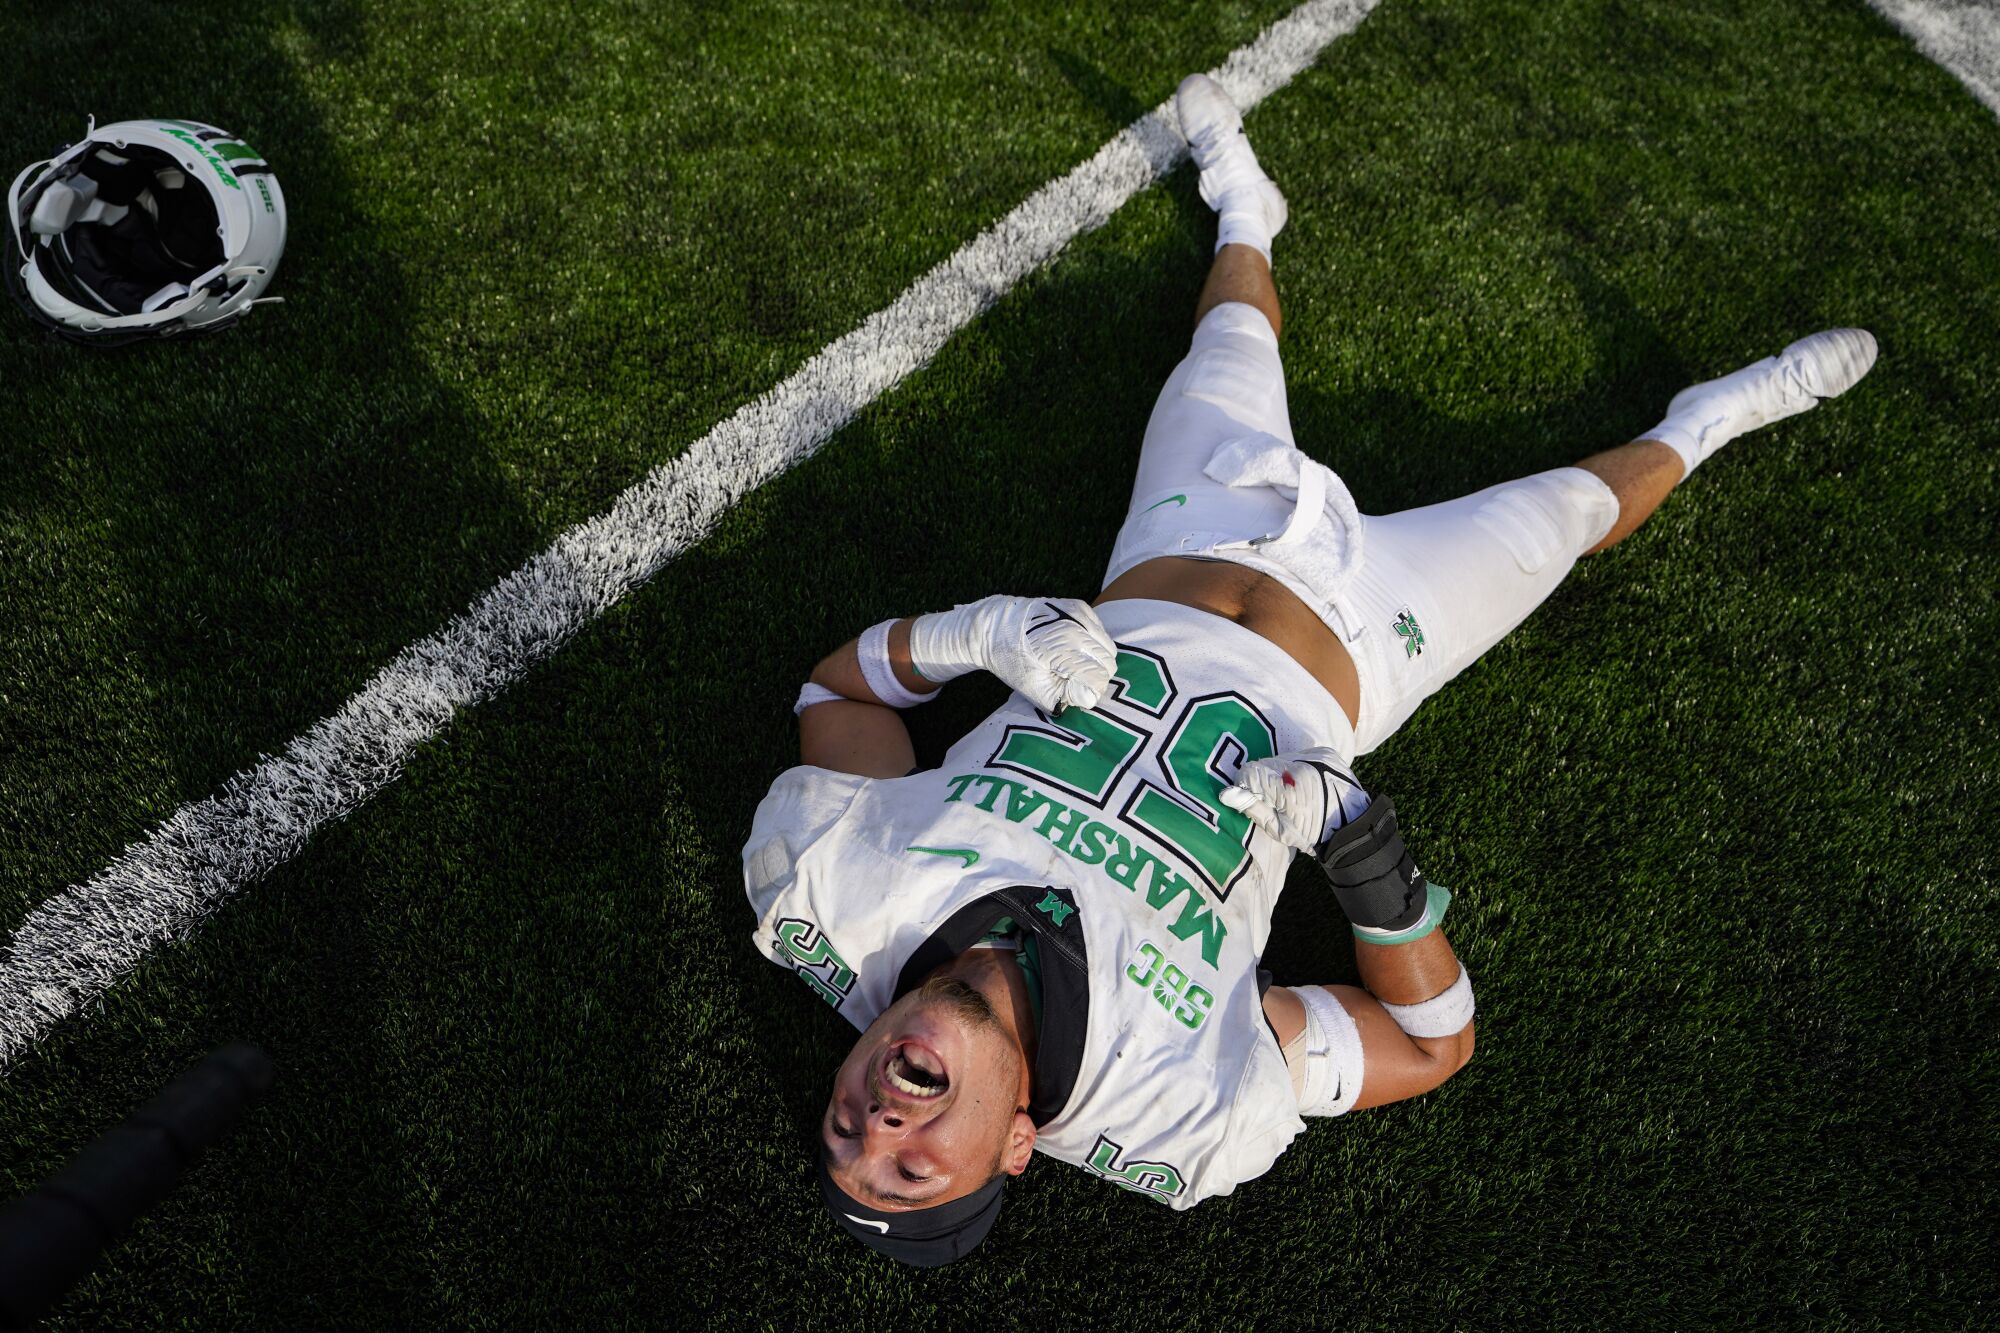 Defensive lineman Marshall Owen Porter celebrates while laying down on a green field.